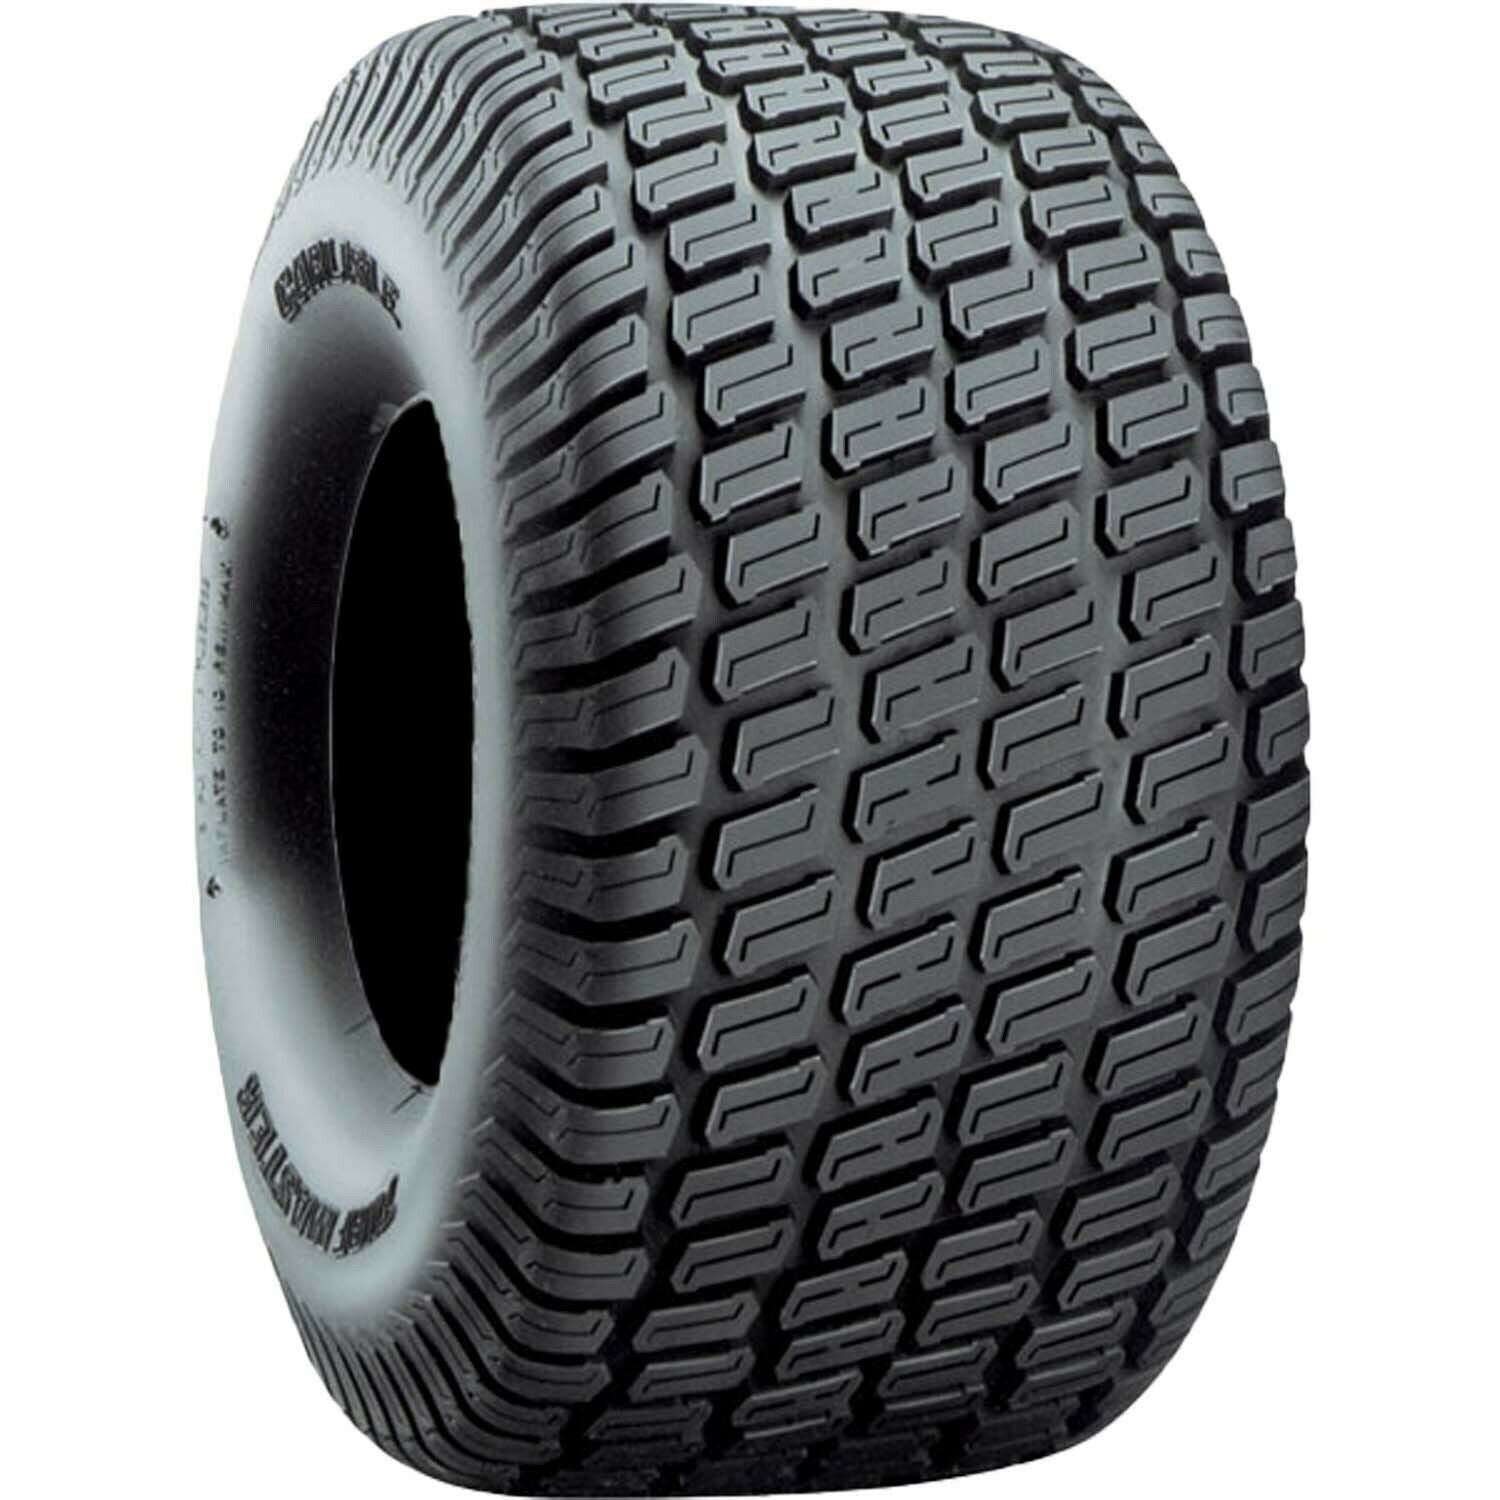 Carlisle Turf Master Lawn and Garden Tire 4Ply 18x6.50-8